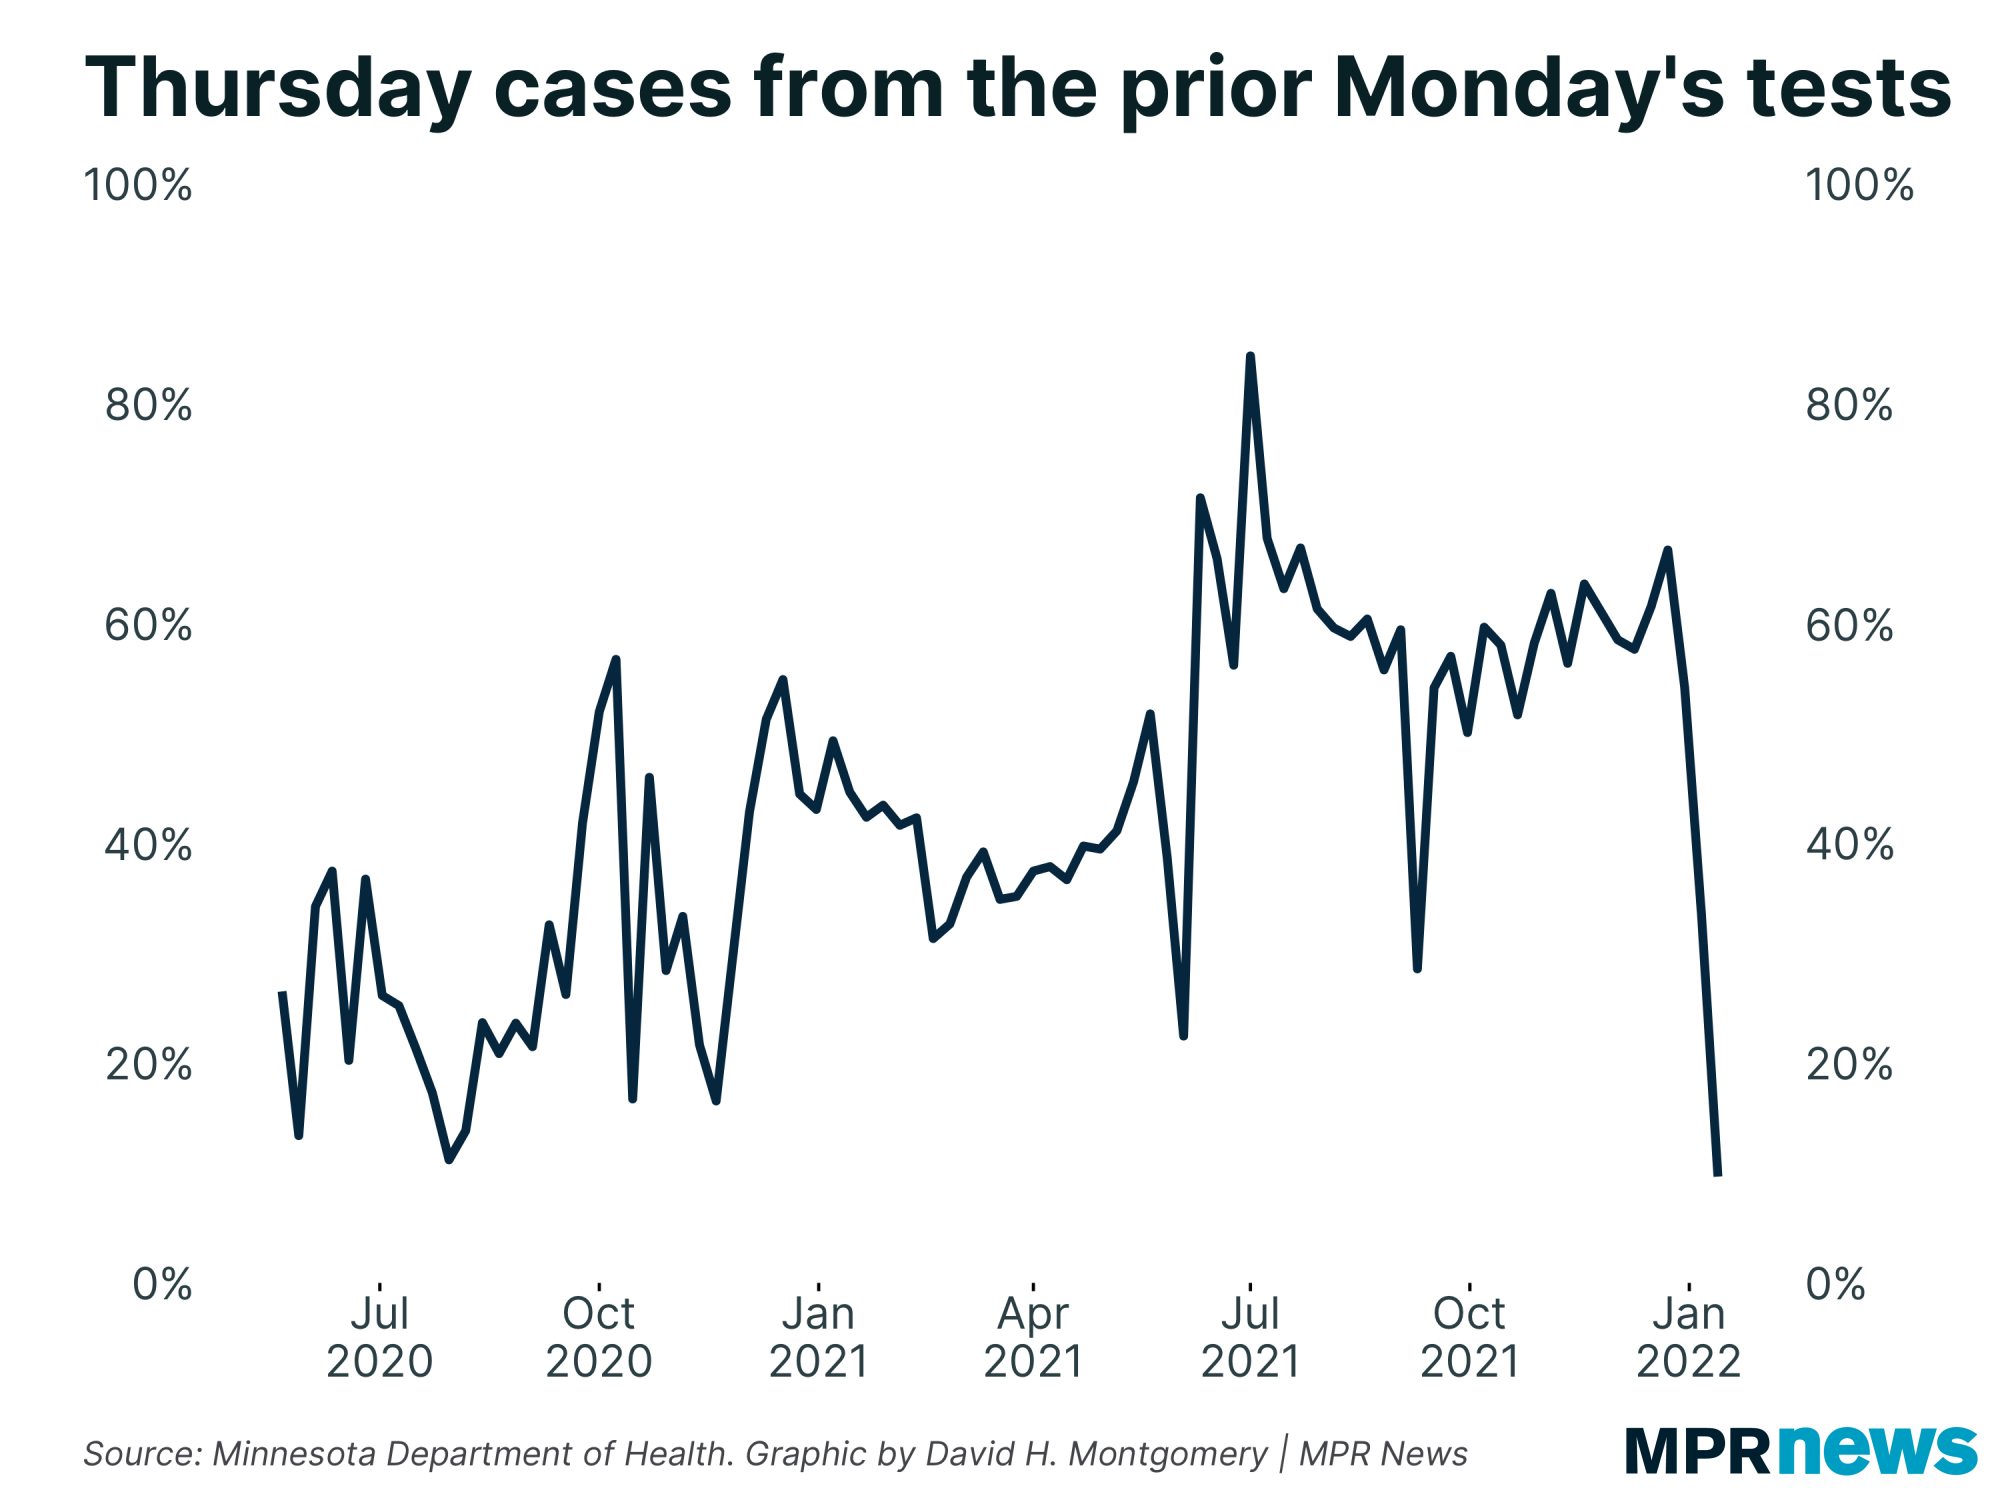 Graph of the share of Thursday cases originating from Monday tests